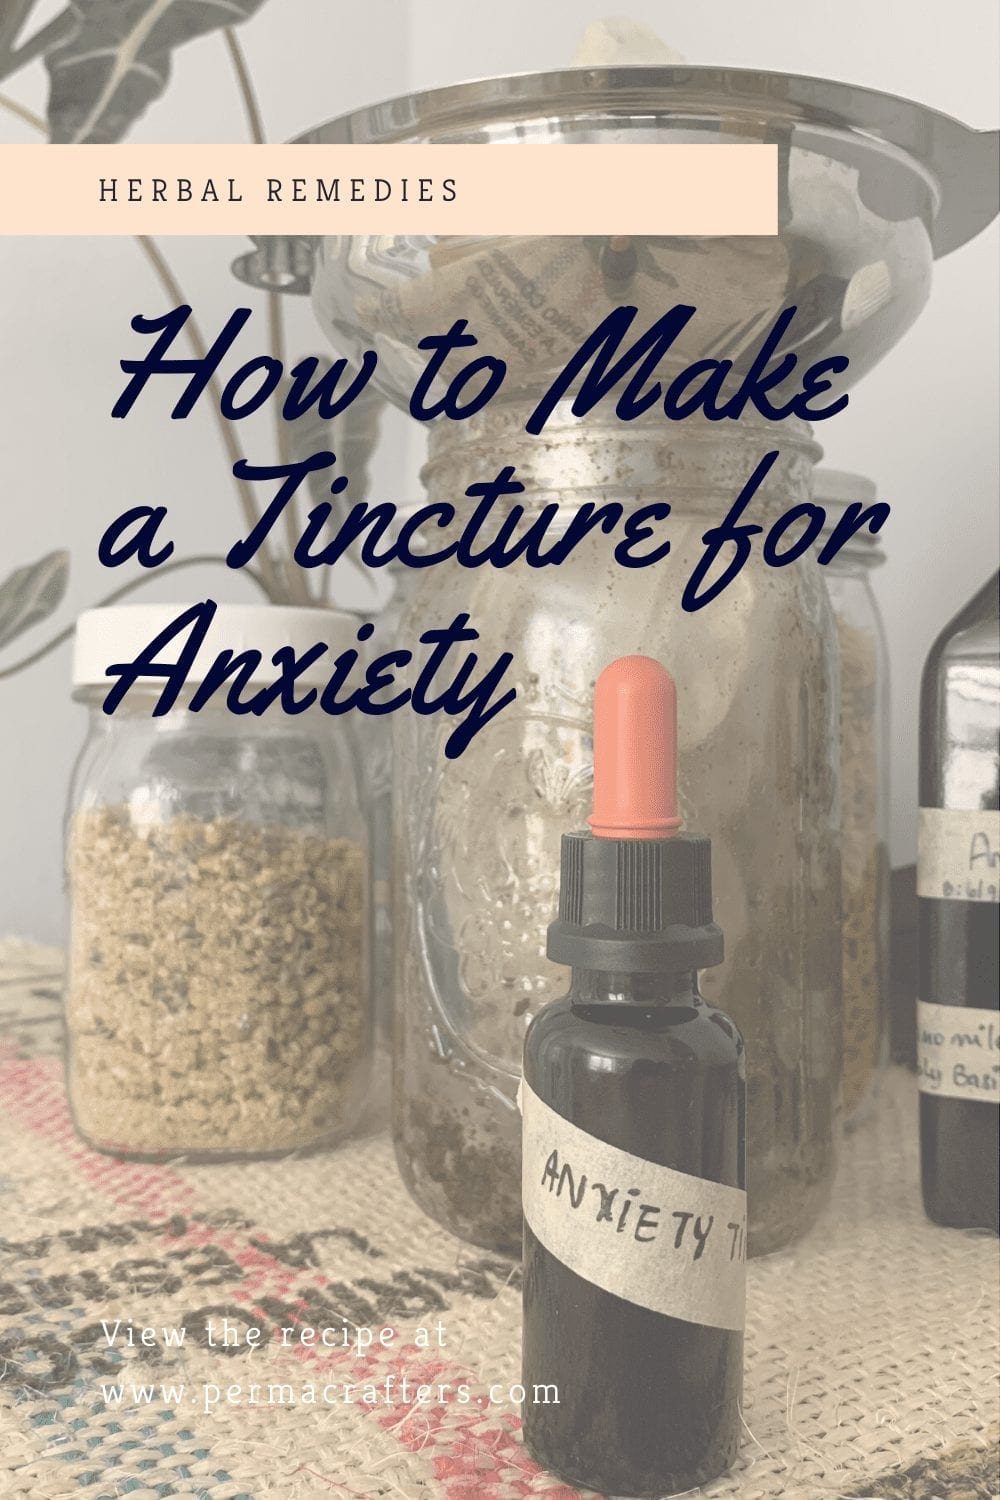 How to Make a Tincture for Anxiety